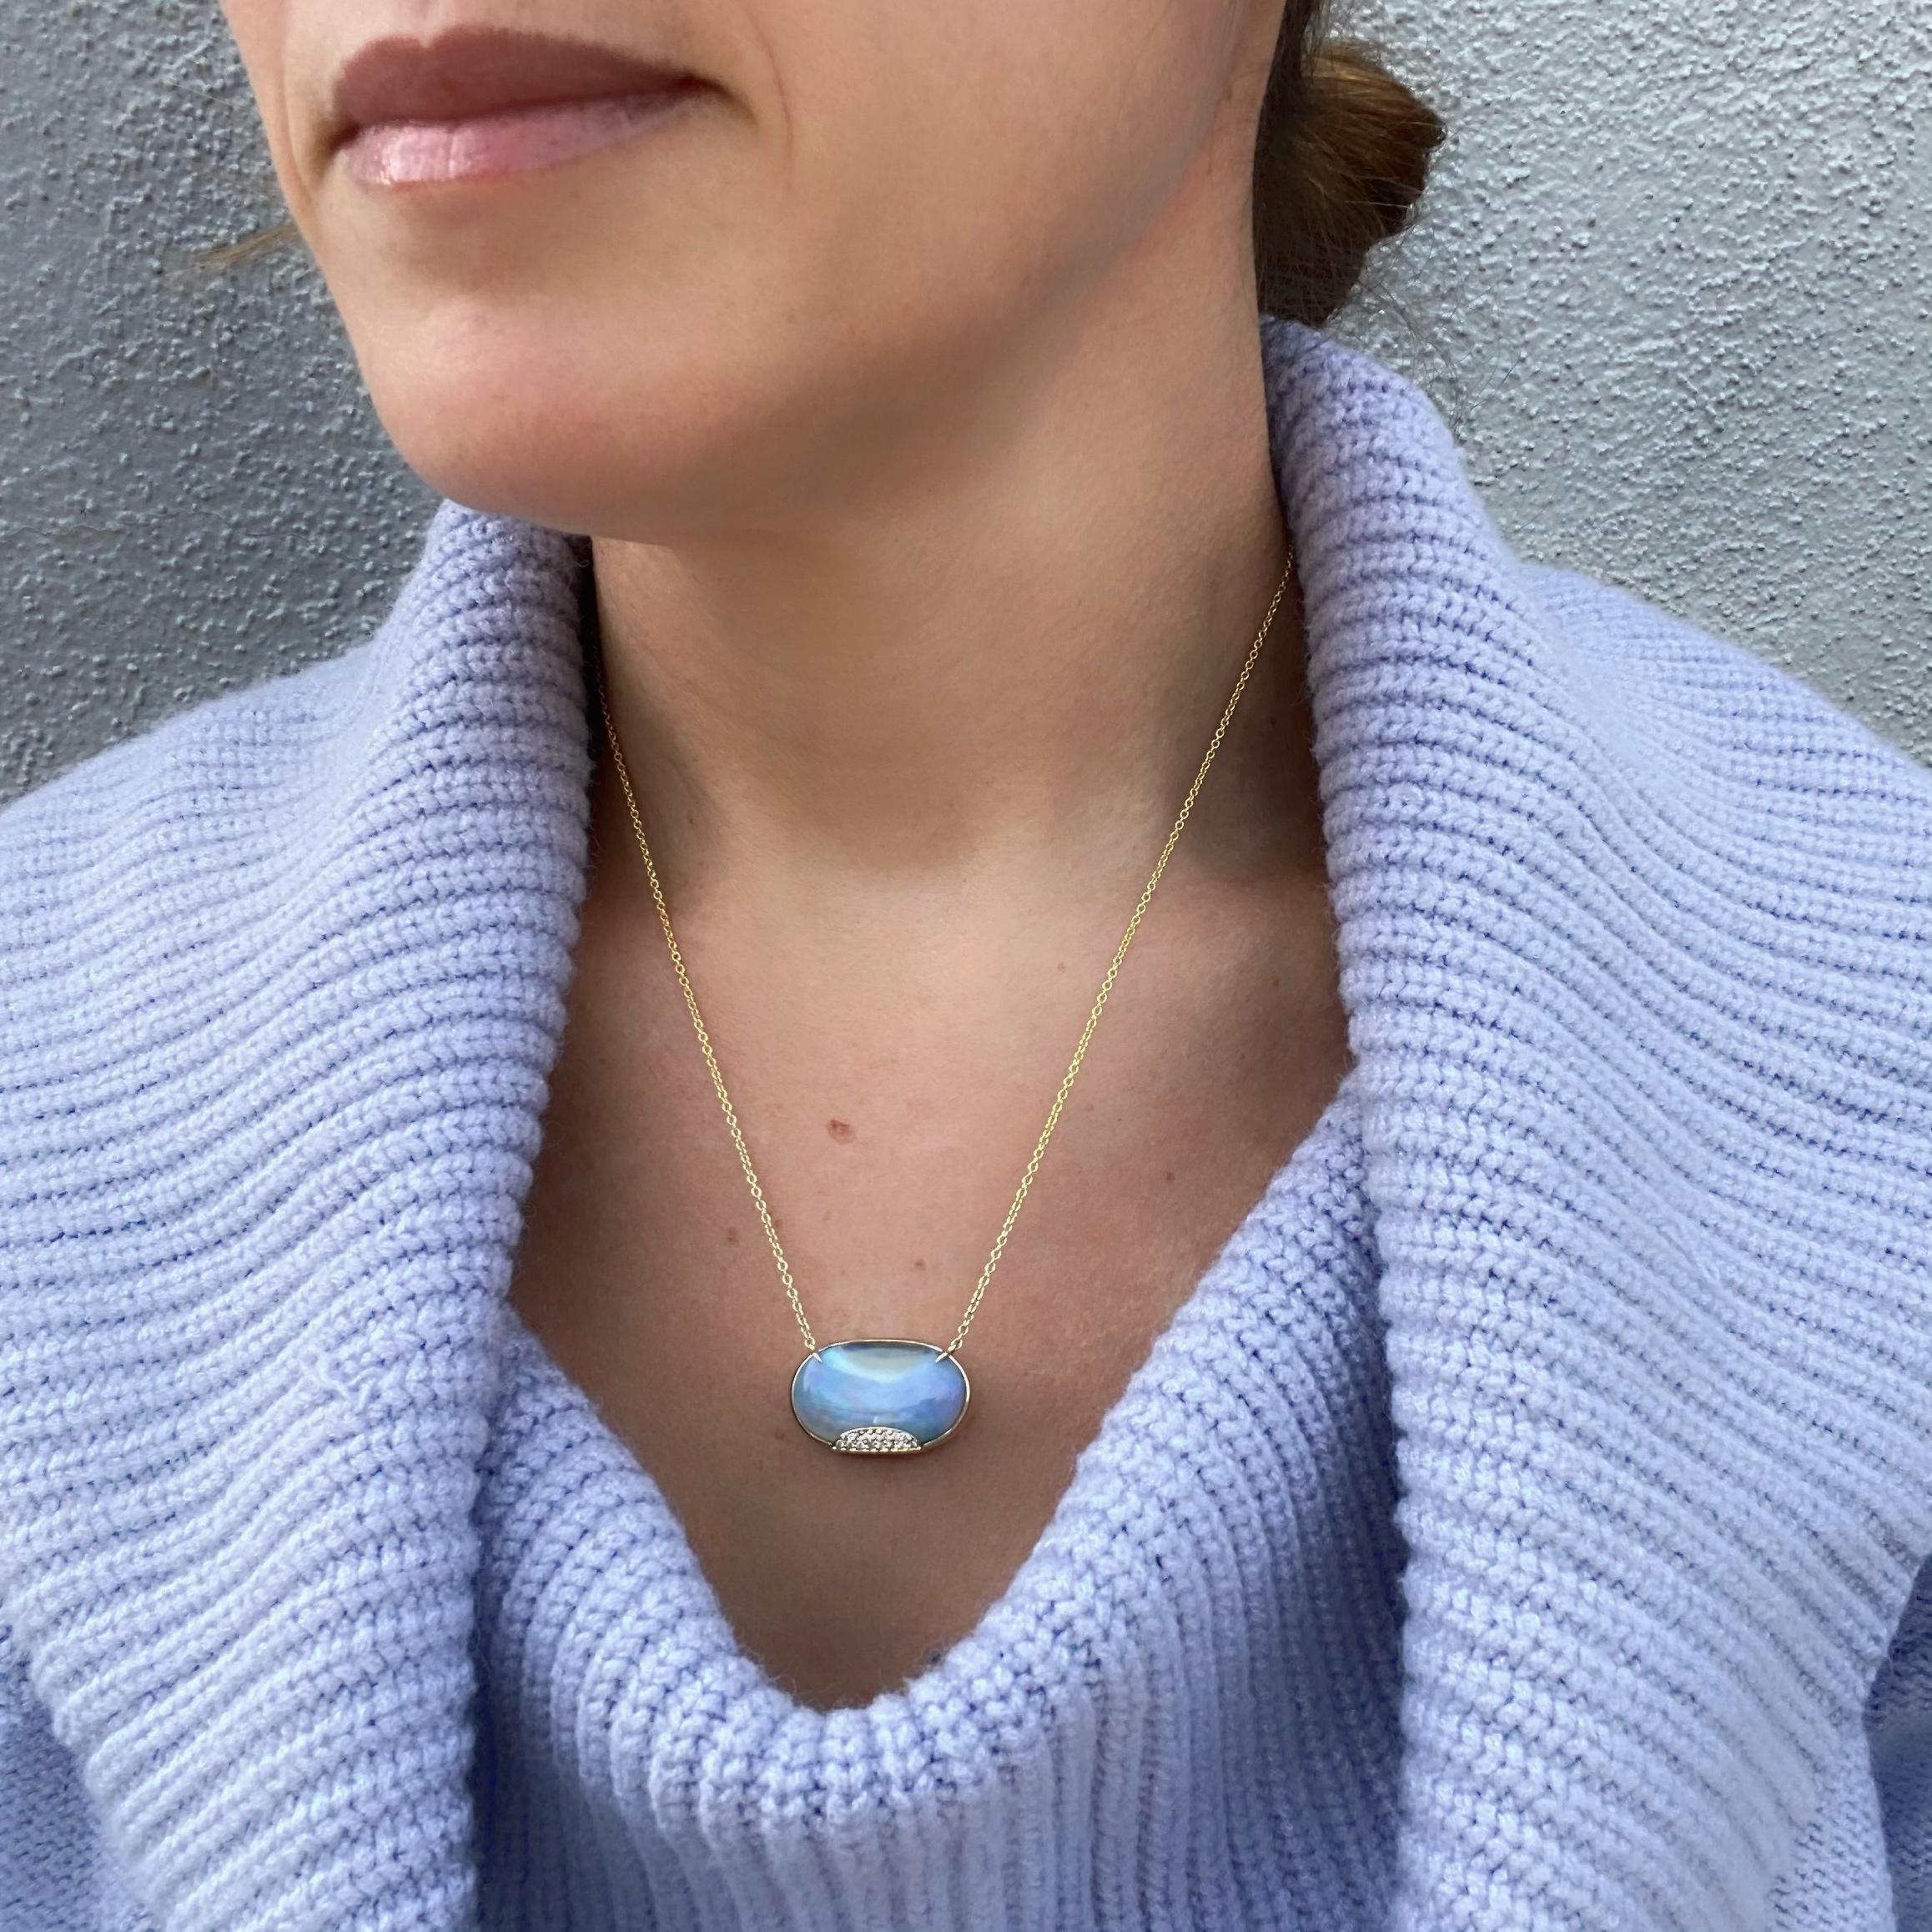 An unearthly Blue Opal is the inspiration for the Heaven's Muse Gold Australian Boulder Opal Necklace.  Its translucent blue hues are just heavenly, with iridescent flares of purple, green and the occasional pink flashing through its skyscape.  At